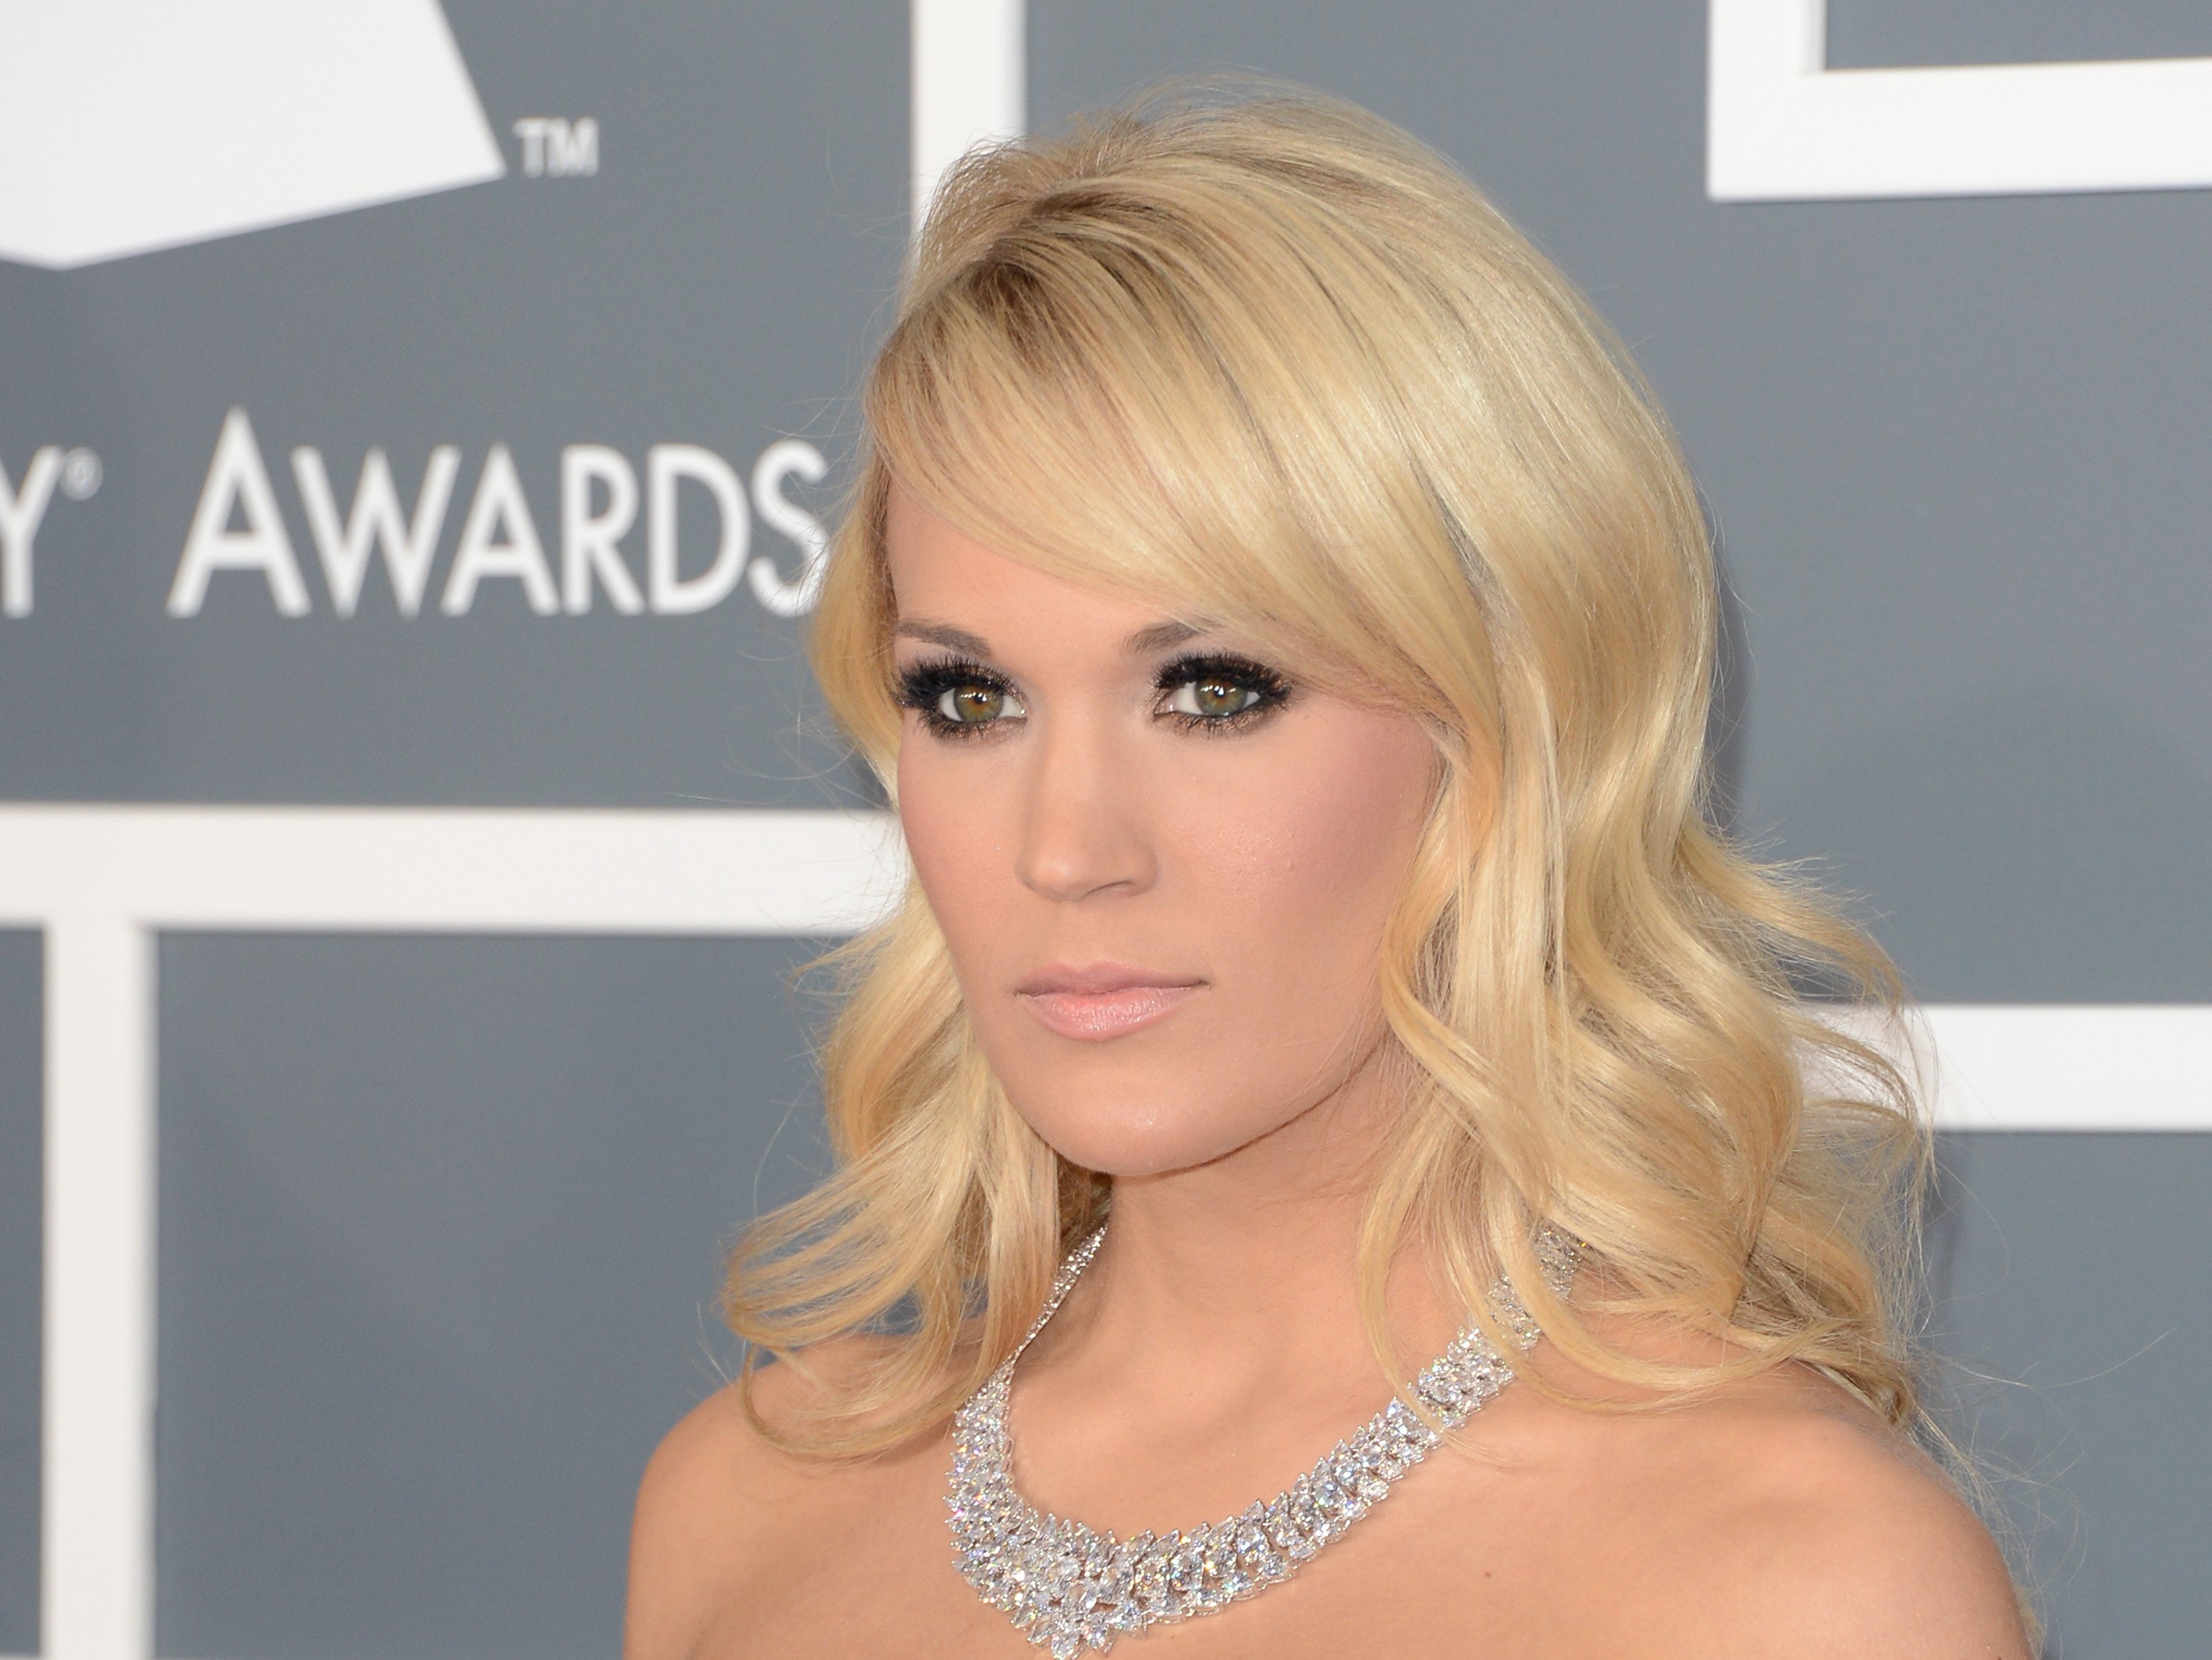 Carrie Underwood at the 55th Annual GRAMMY Awards at Staples Center on February 10, 2013. | Source: Getty Images 